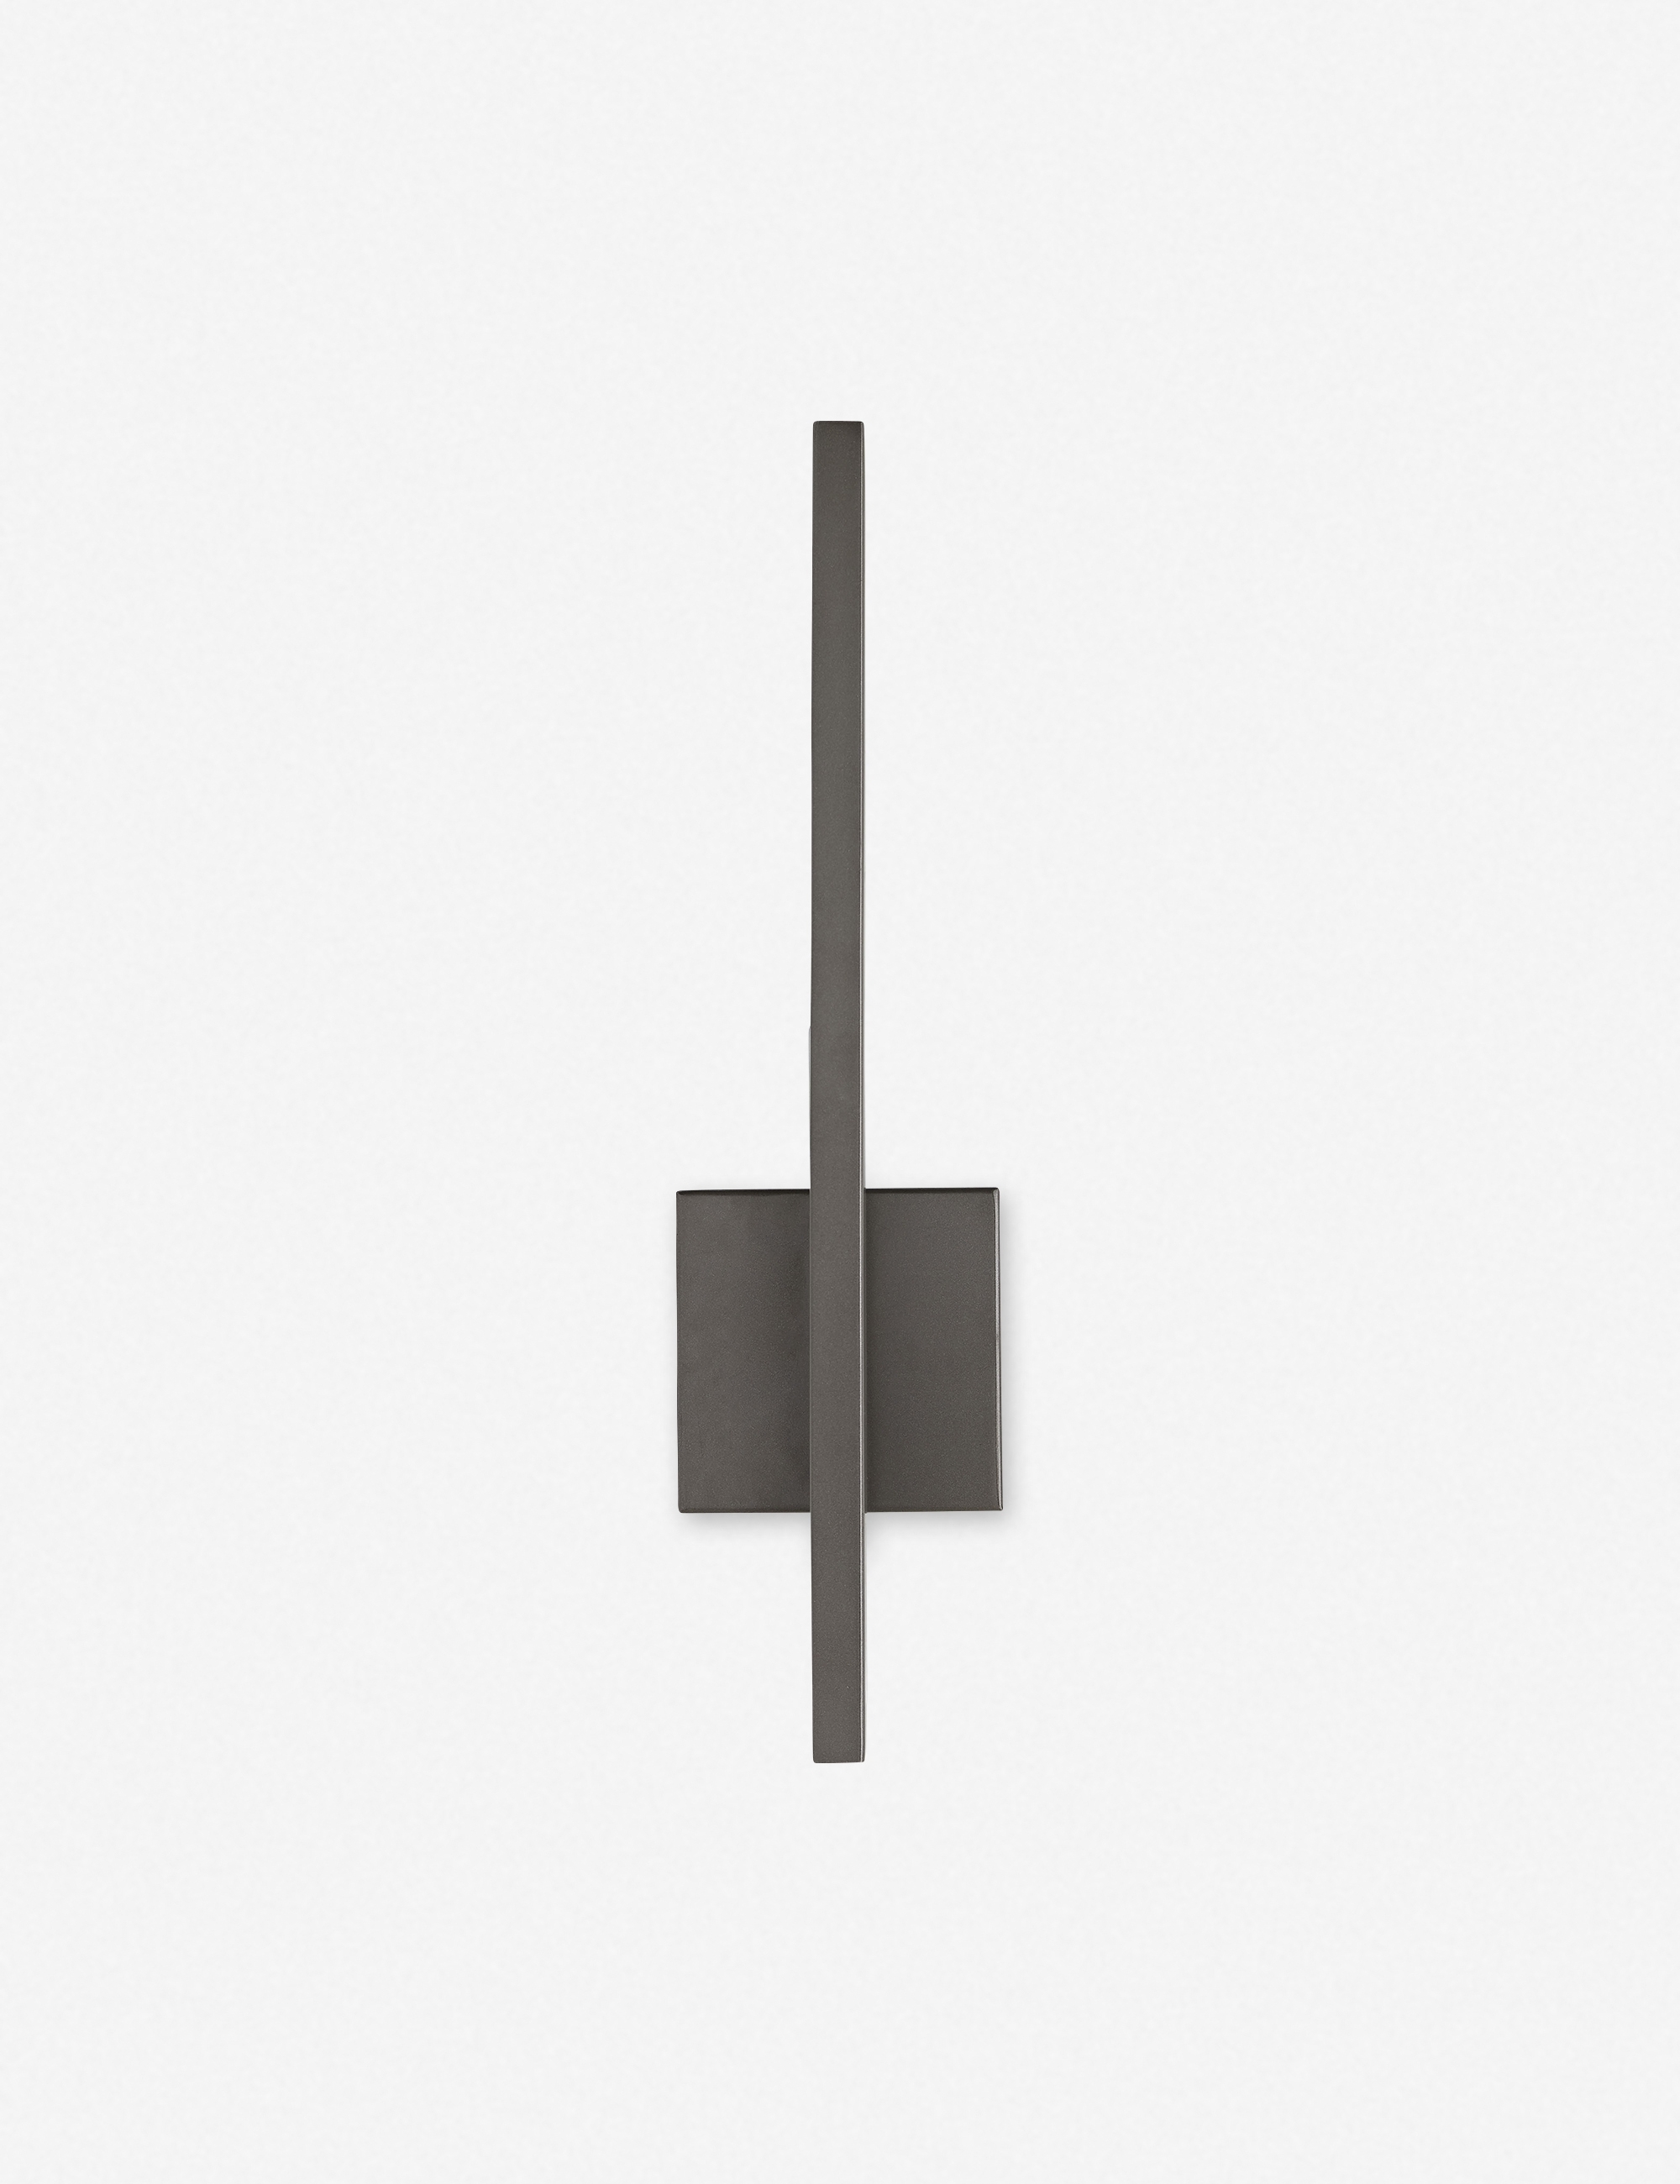 Simba Indoor / Outdoor Sconce by Arteriors - Image 1